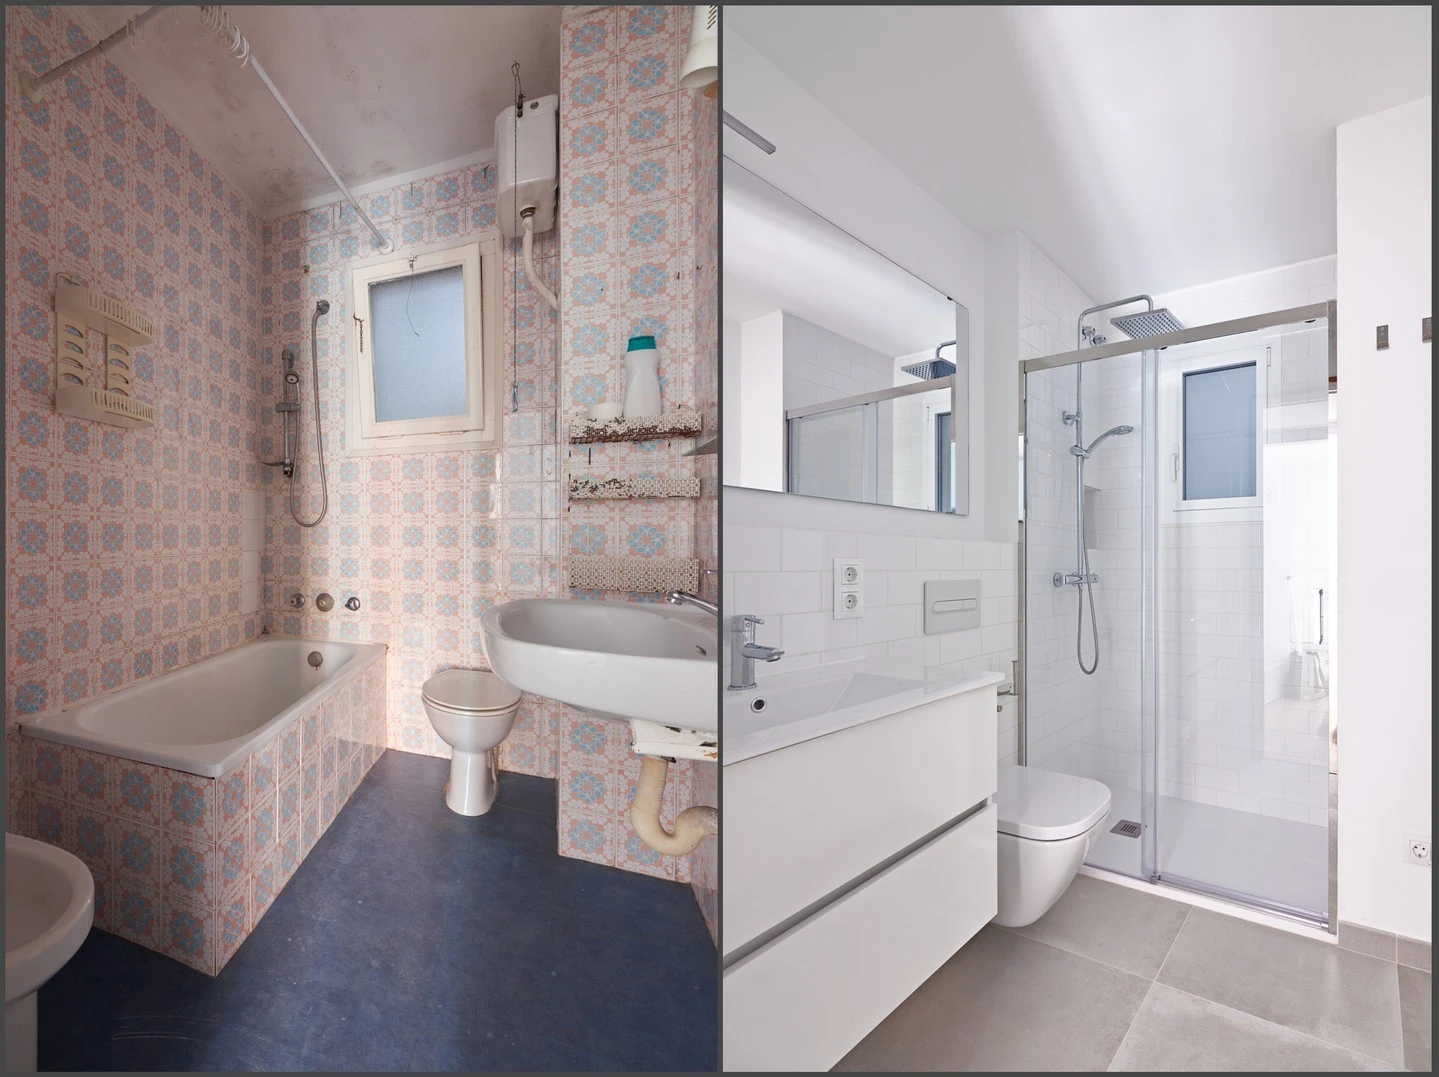 A residential bathroom before and after it has been renovated with new flooring and fixtures, as well as a tub-to-shower conversion.